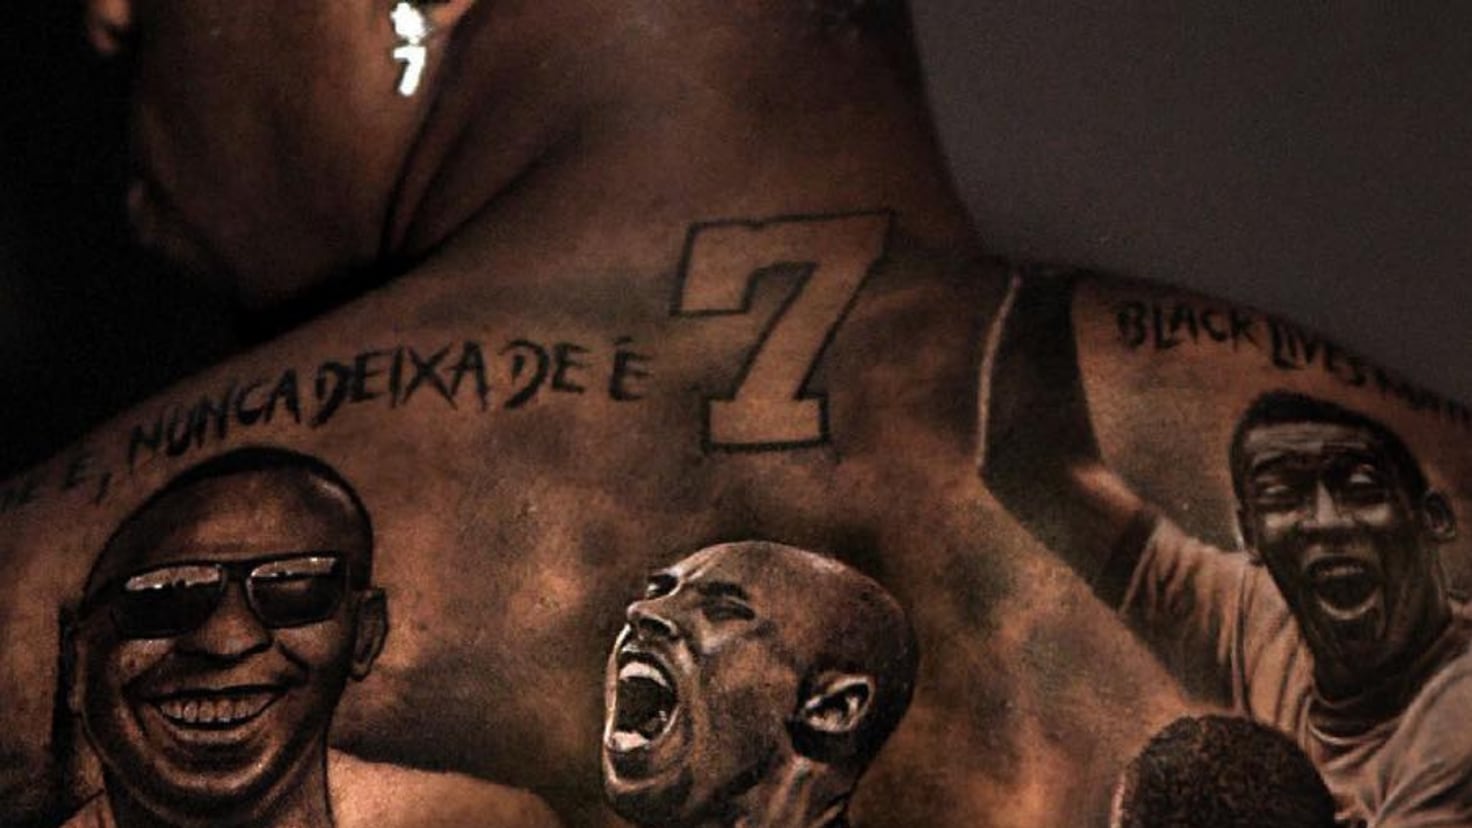 Vinicius' new tattoo inspired by sports legends: from Pel to Kobe Bryant
